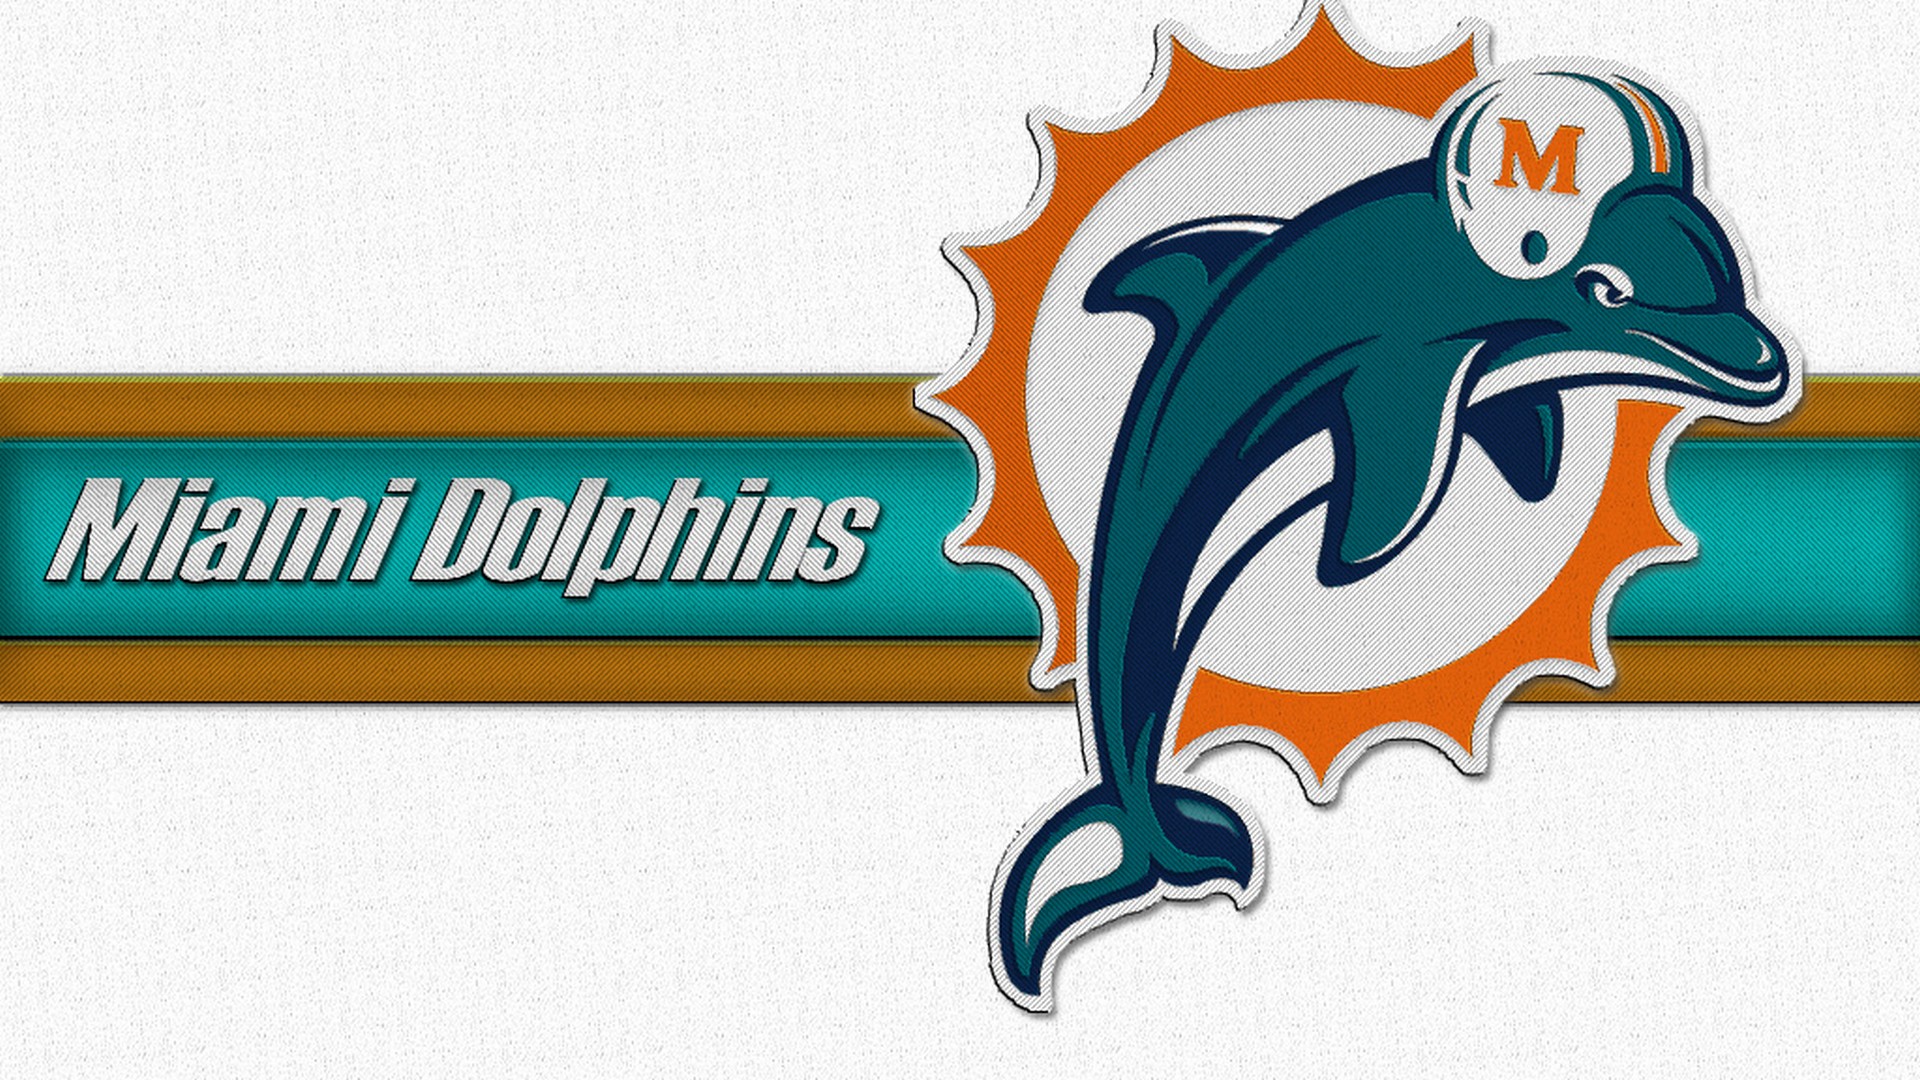 HD Backgrounds Miami Dolphins With Resolution 1920X1080 pixel. You can make this wallpaper for your Mac or Windows Desktop Background, iPhone, Android or Tablet and another Smartphone device for free